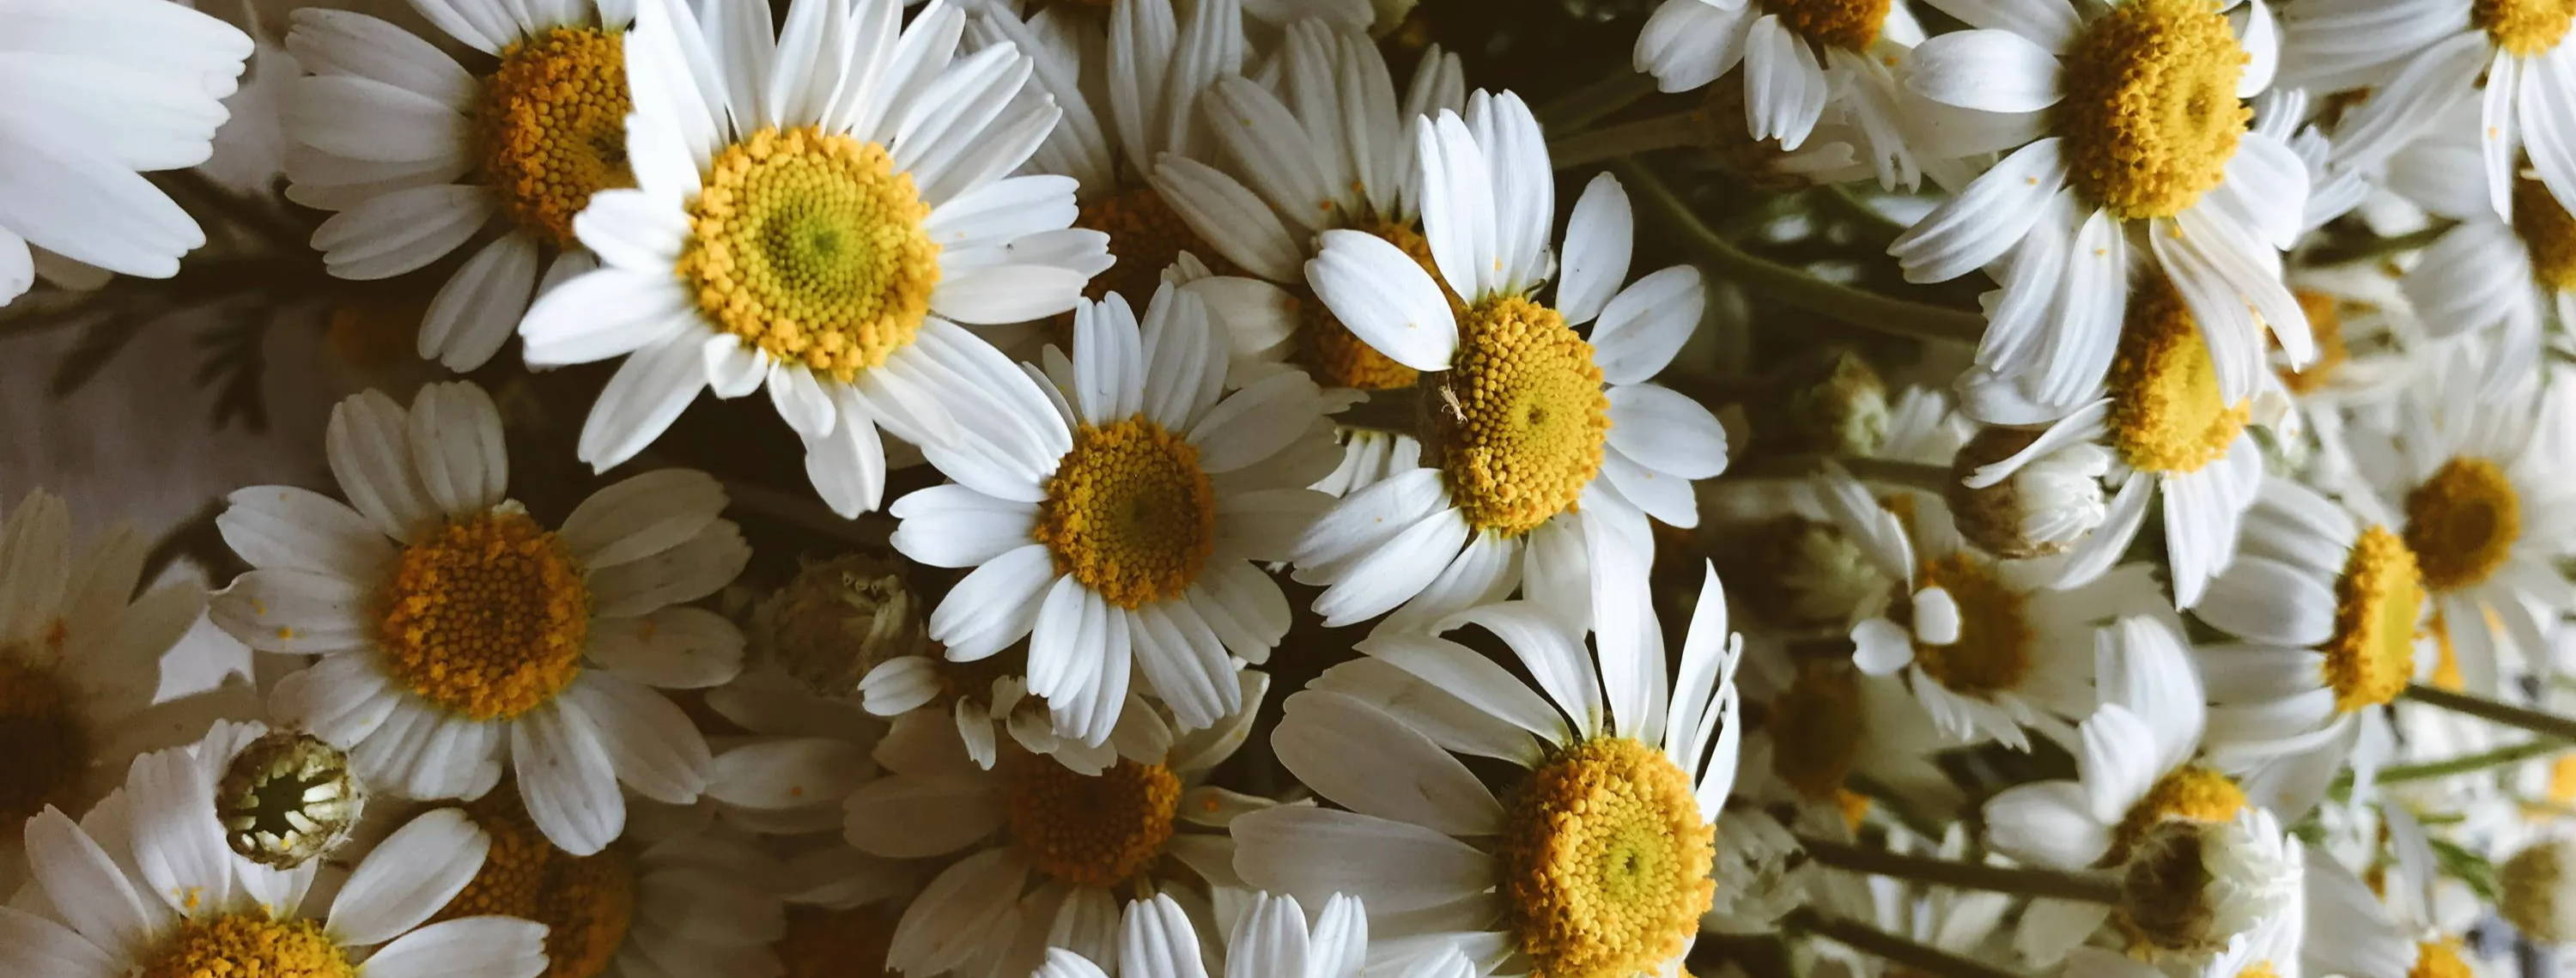 5 Benefits Of Chamomile Essential Oil (And How To Use It) - AWO